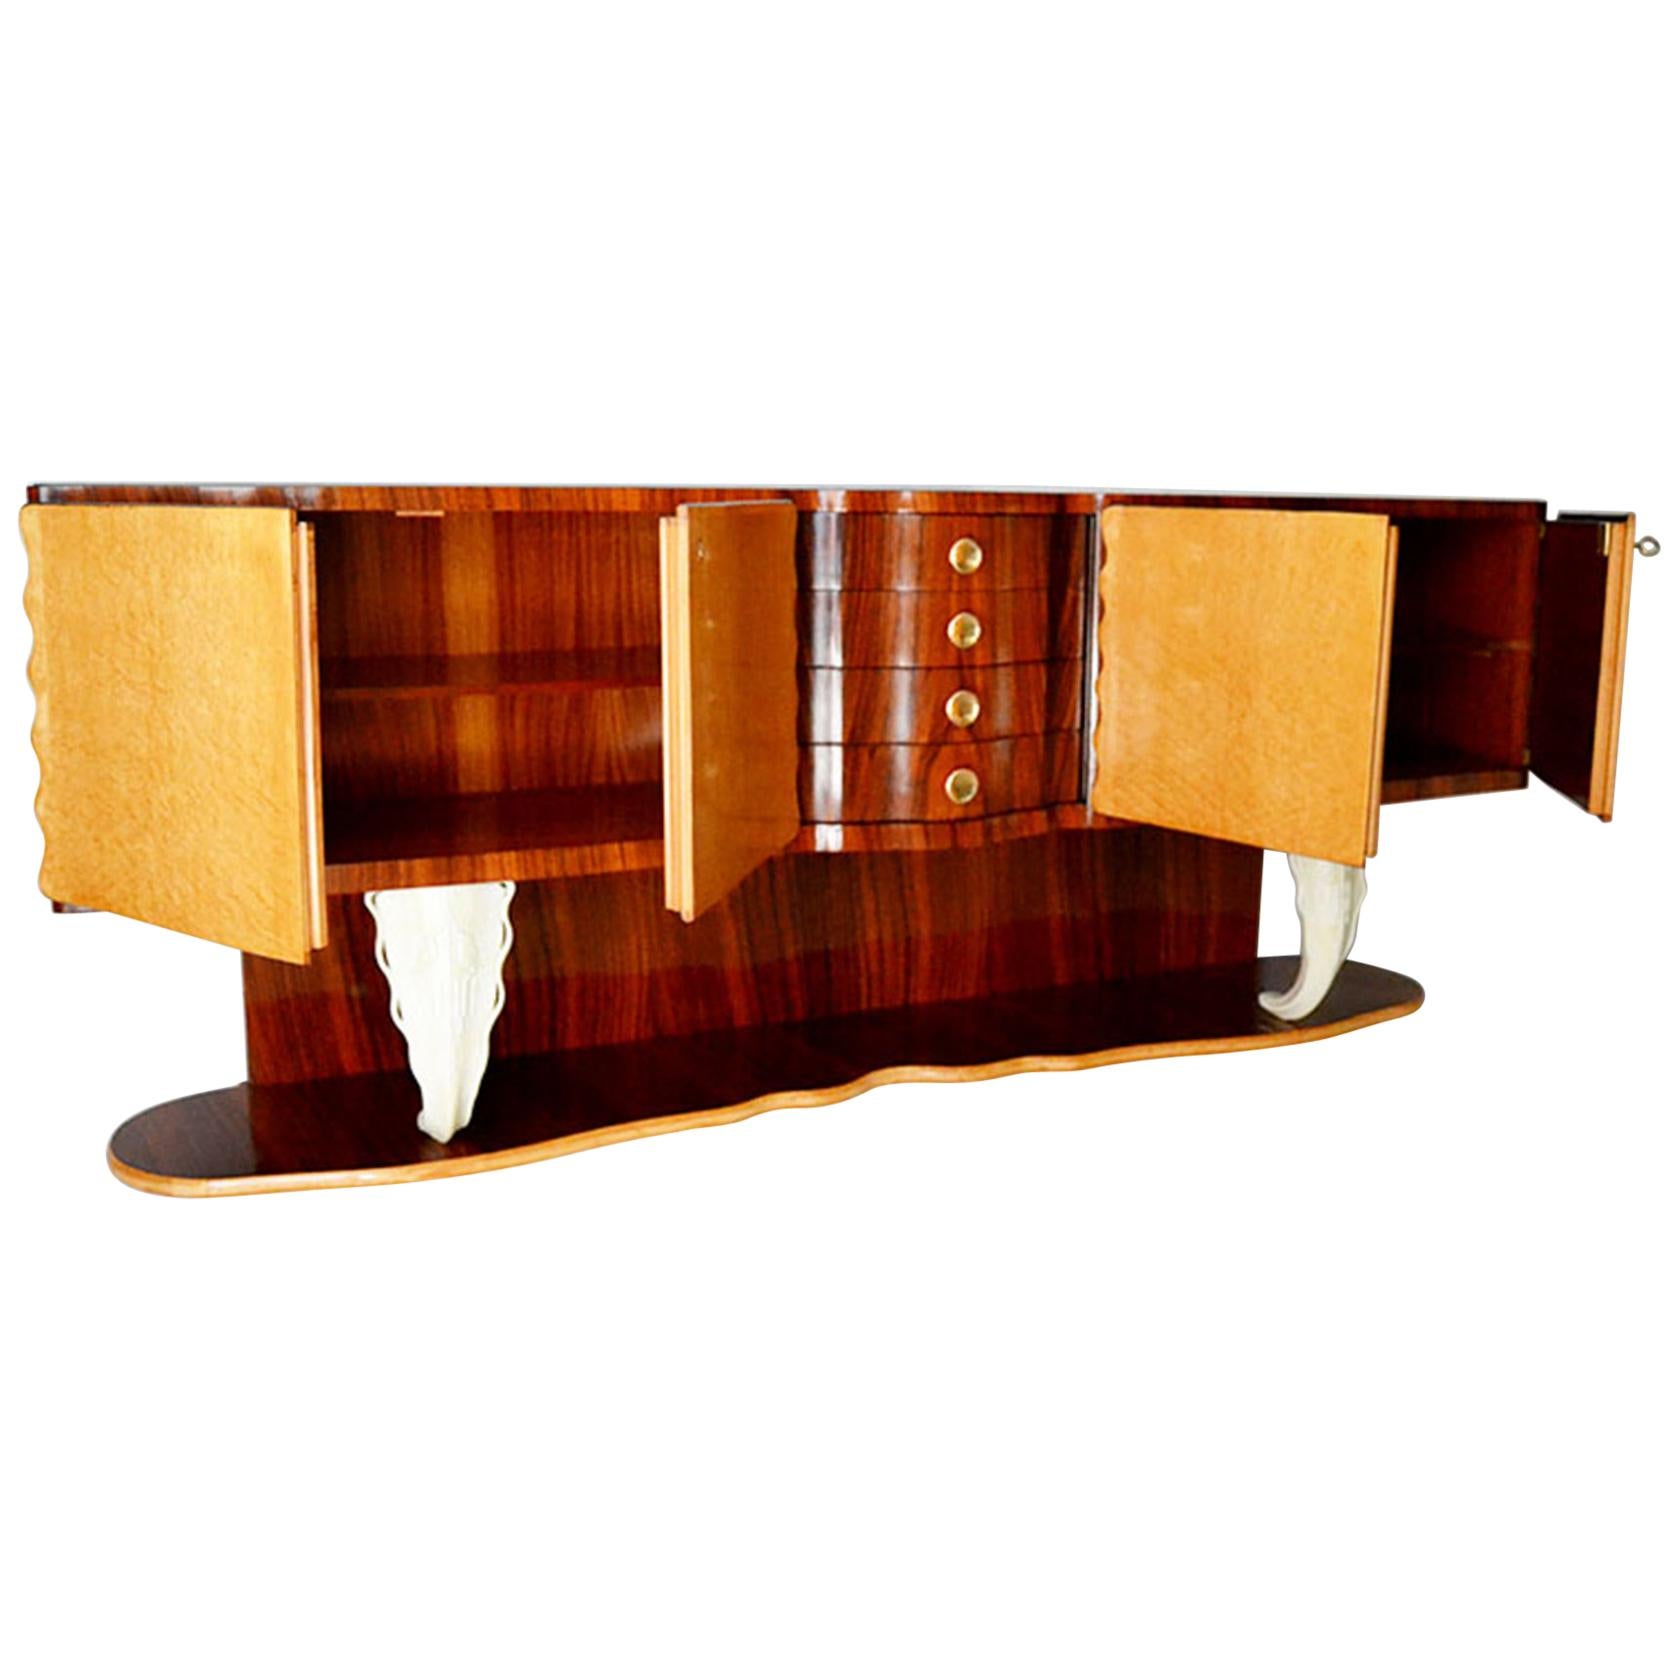 Large Art Deco Buffet by Designer Pier Luigi Colli, Rosewood, 1940s, Italy For Sale